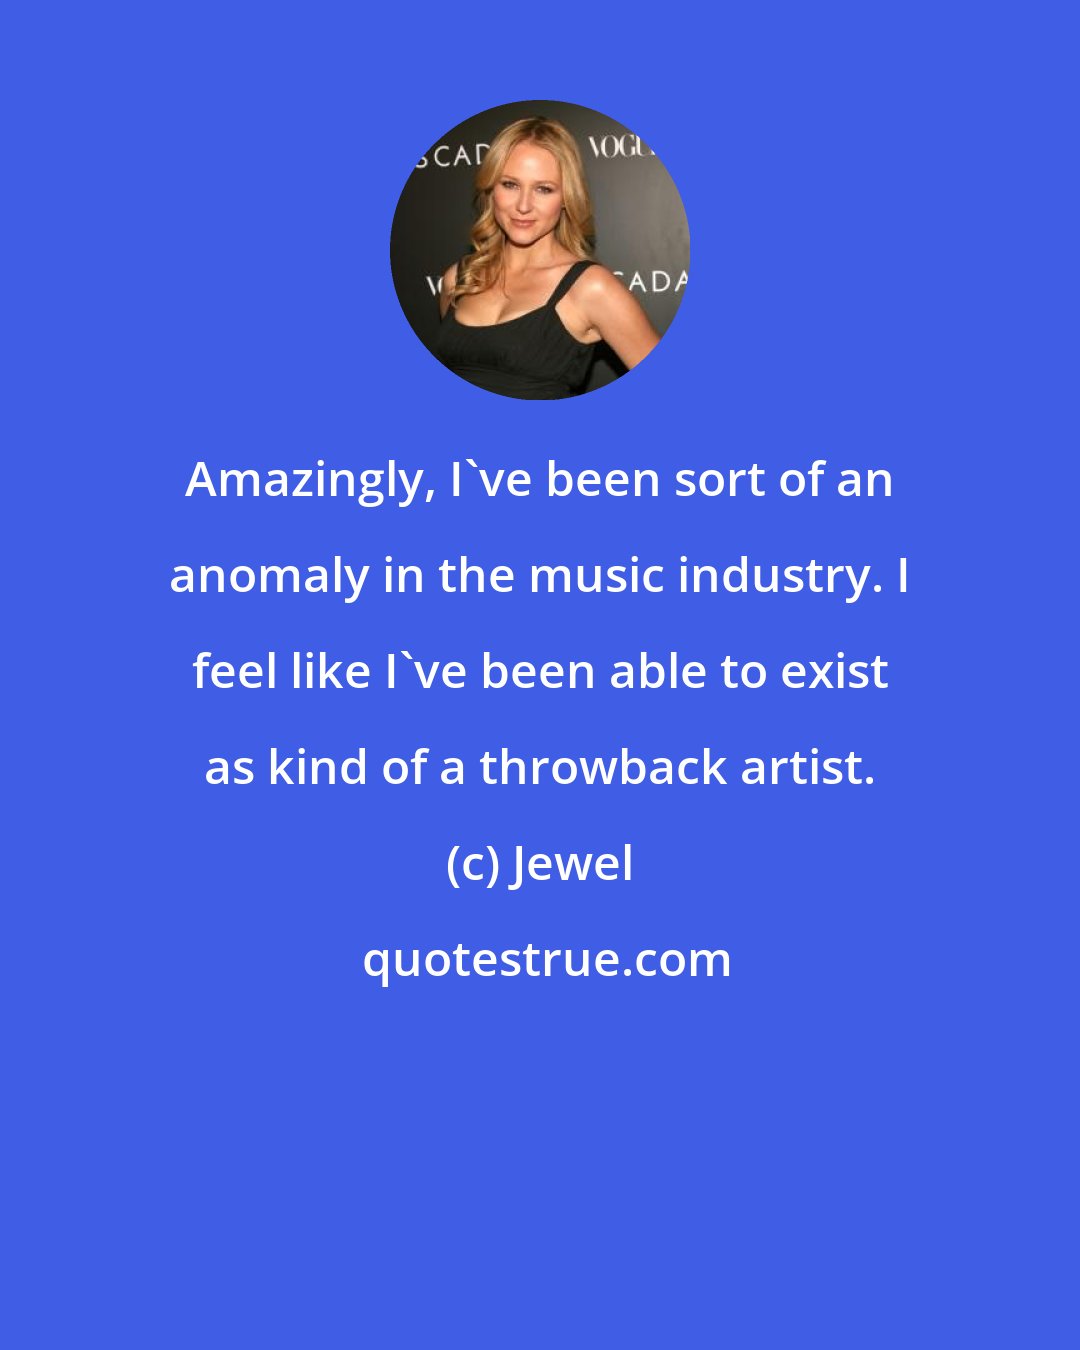 Jewel: Amazingly, I've been sort of an anomaly in the music industry. I feel like I've been able to exist as kind of a throwback artist.